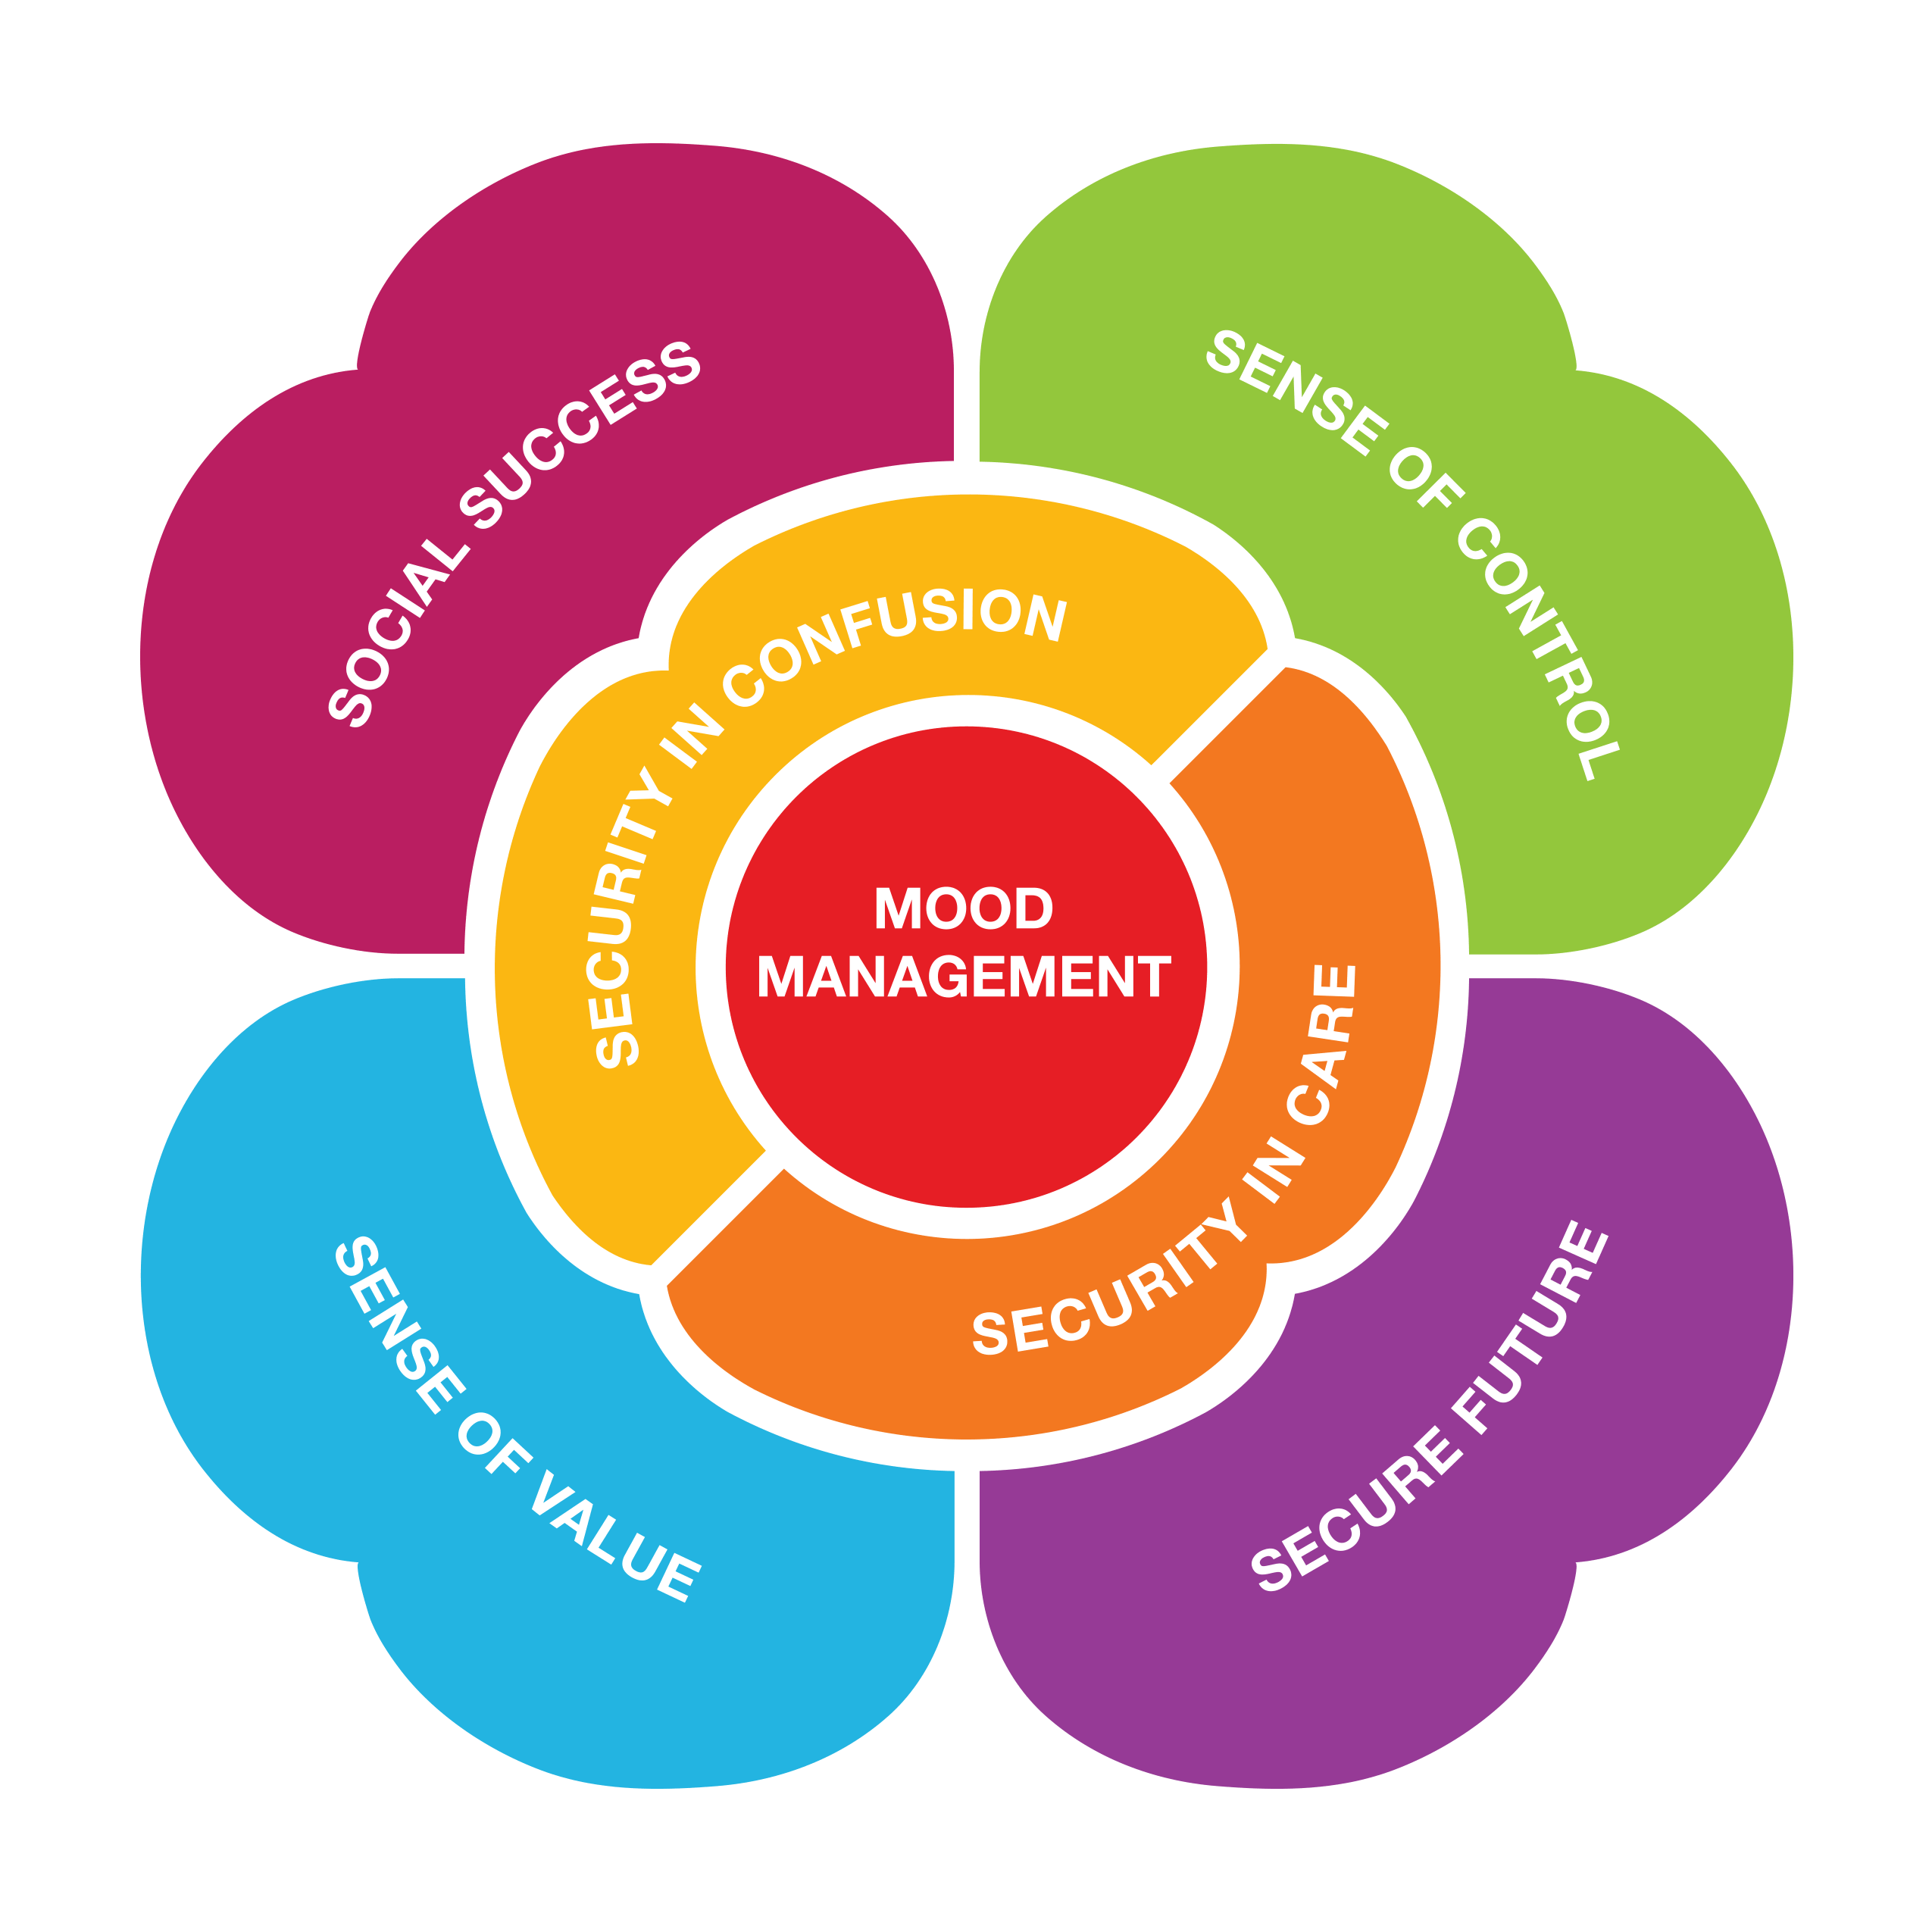 the DAWN Method includes 7 Tools: The 7 Tools of the DAWN Method: Mood Management, Security in Confusion, Security in Care, Social Success, Sense of Control, Sense of Value, Secure Future